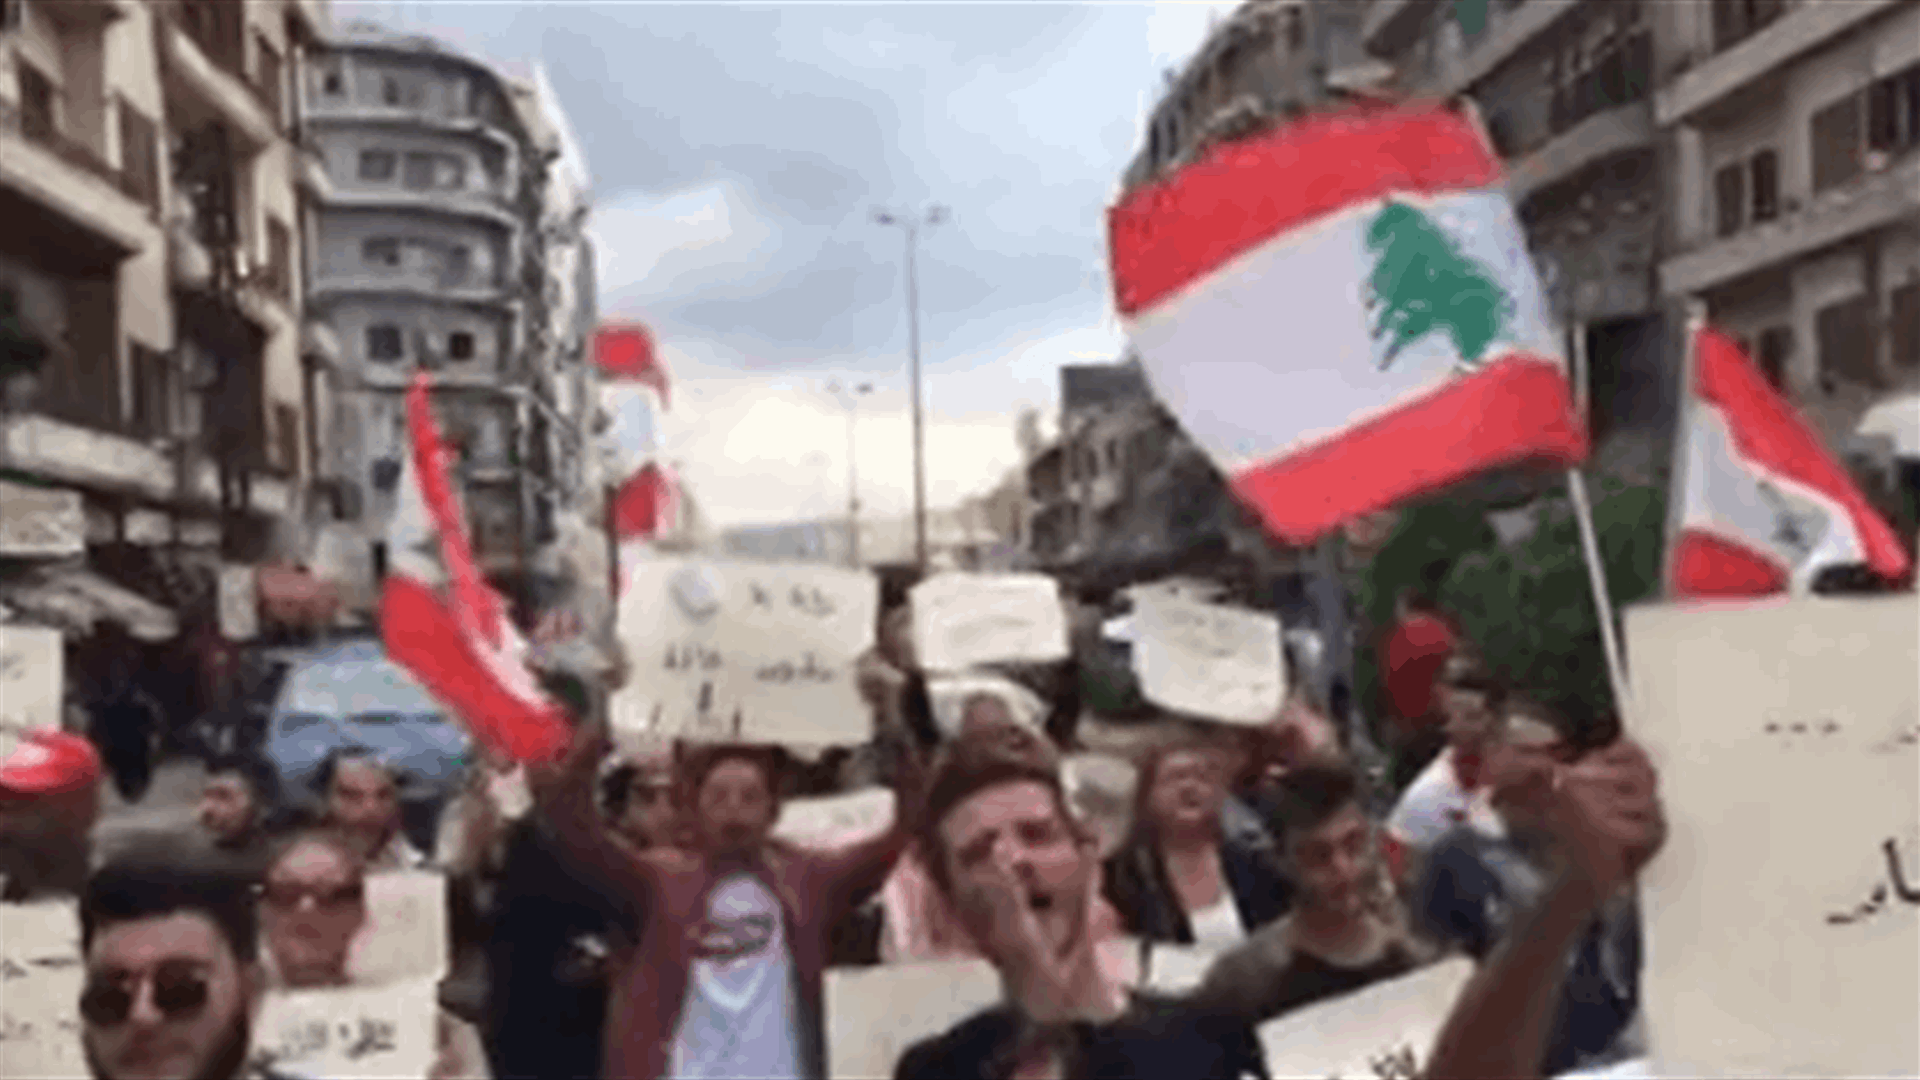 Protesters march across Tripoli streets (Video)